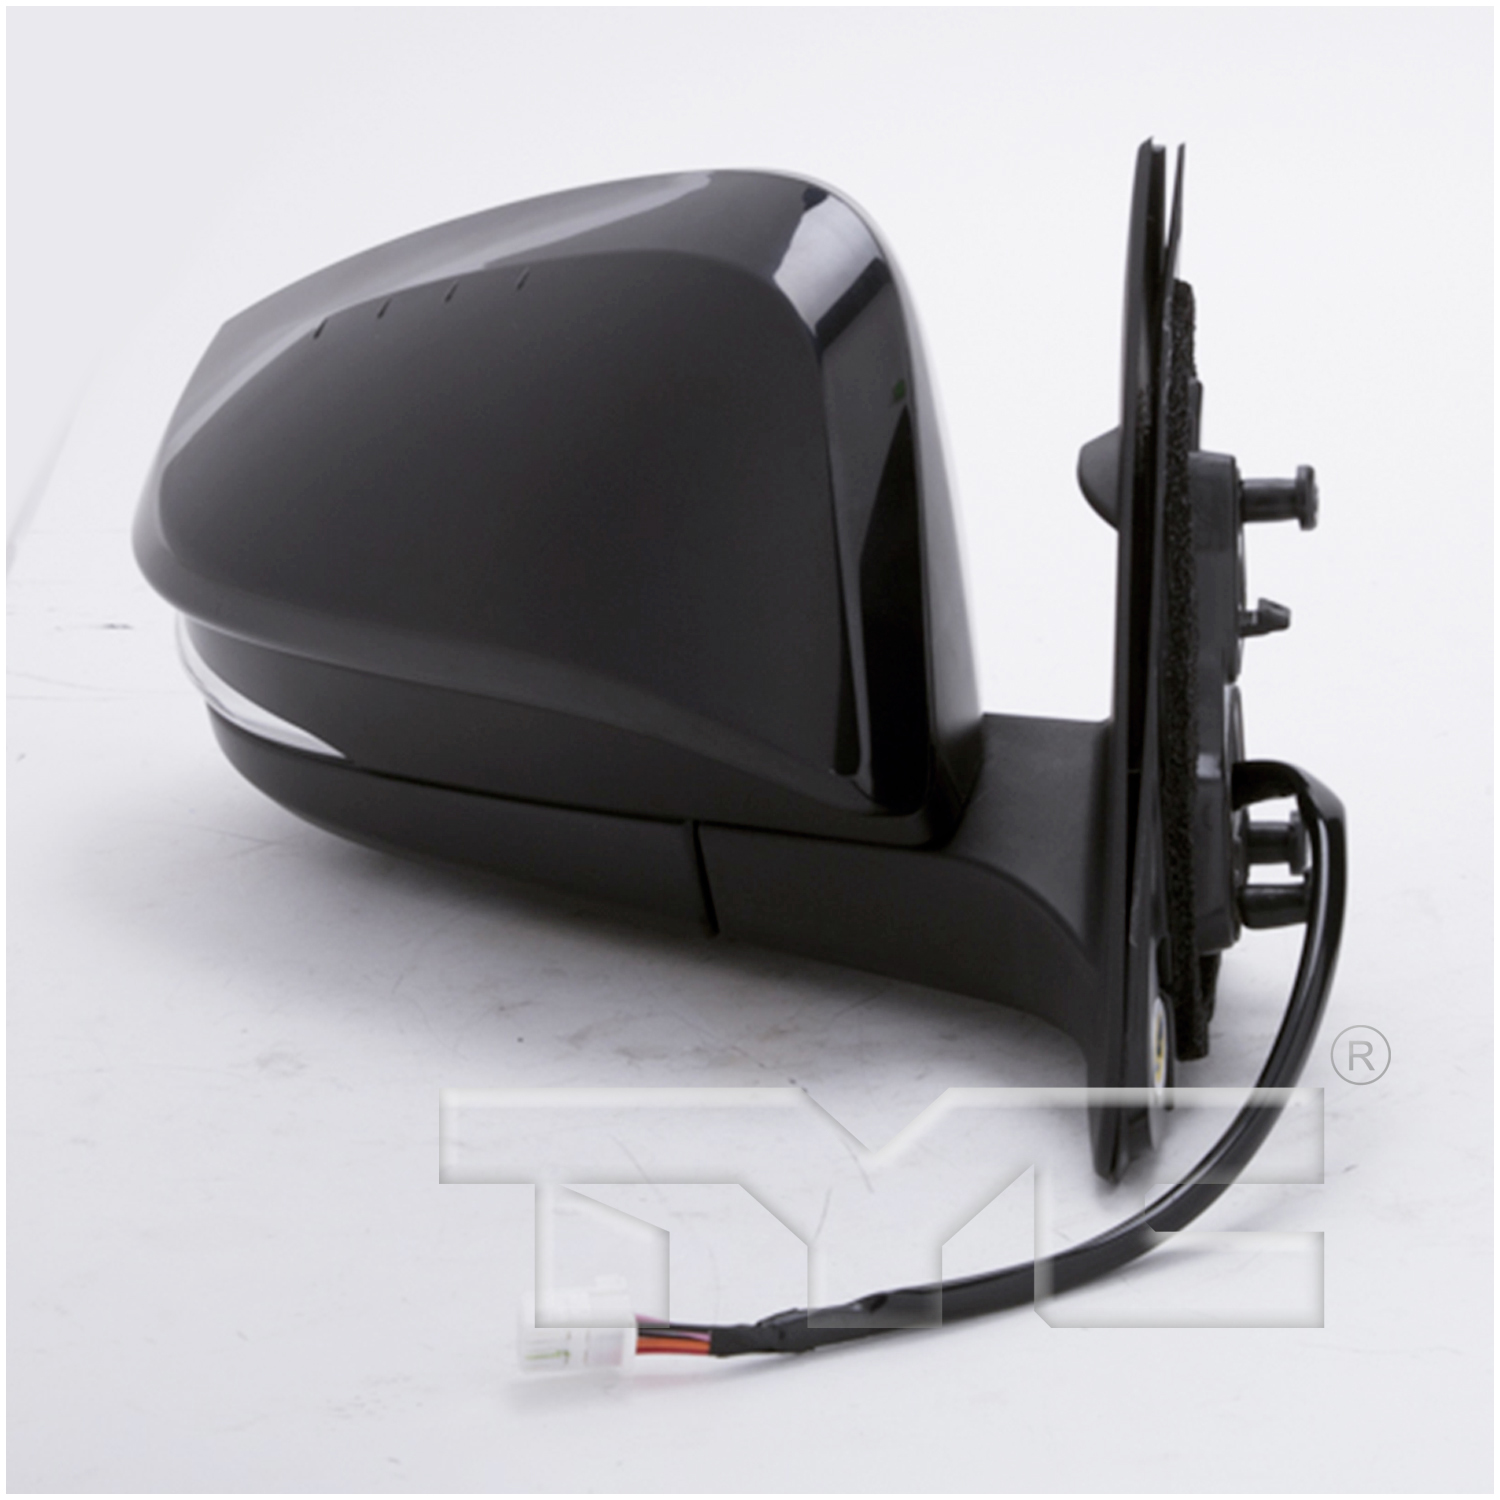 Aftermarket MIRRORS for TOYOTA - HIGHLANDER, HIGHLANDER,14-16,RT Mirror outside rear view